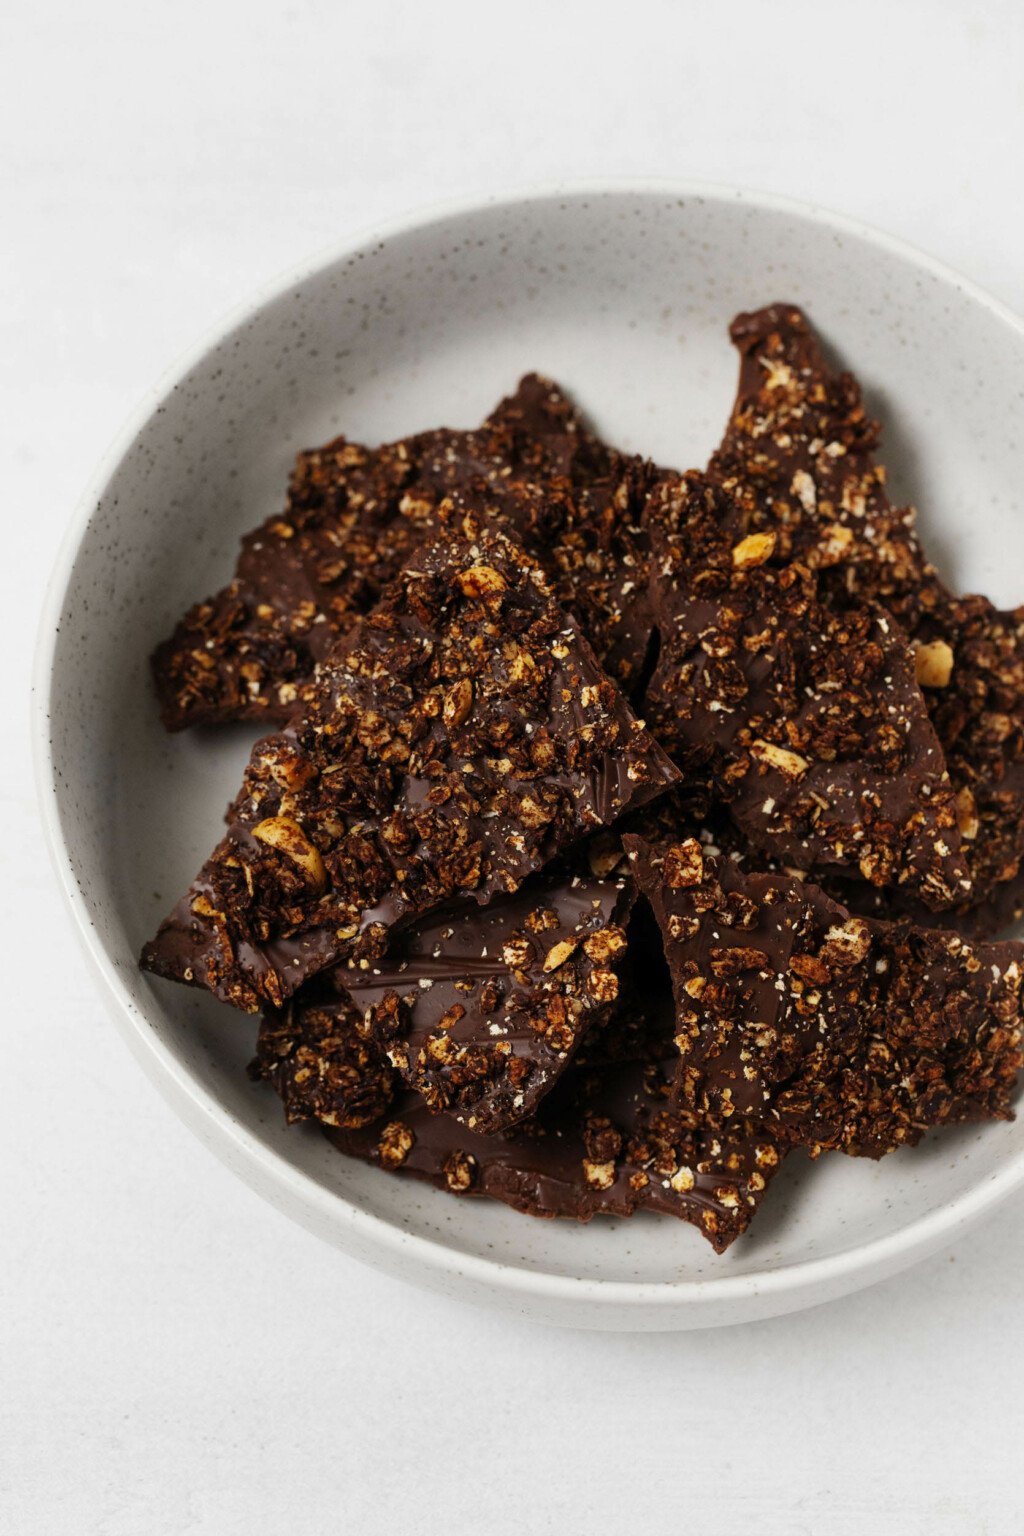 A round ceramic bowl is filled with vegan granola chocolate bark pieces.